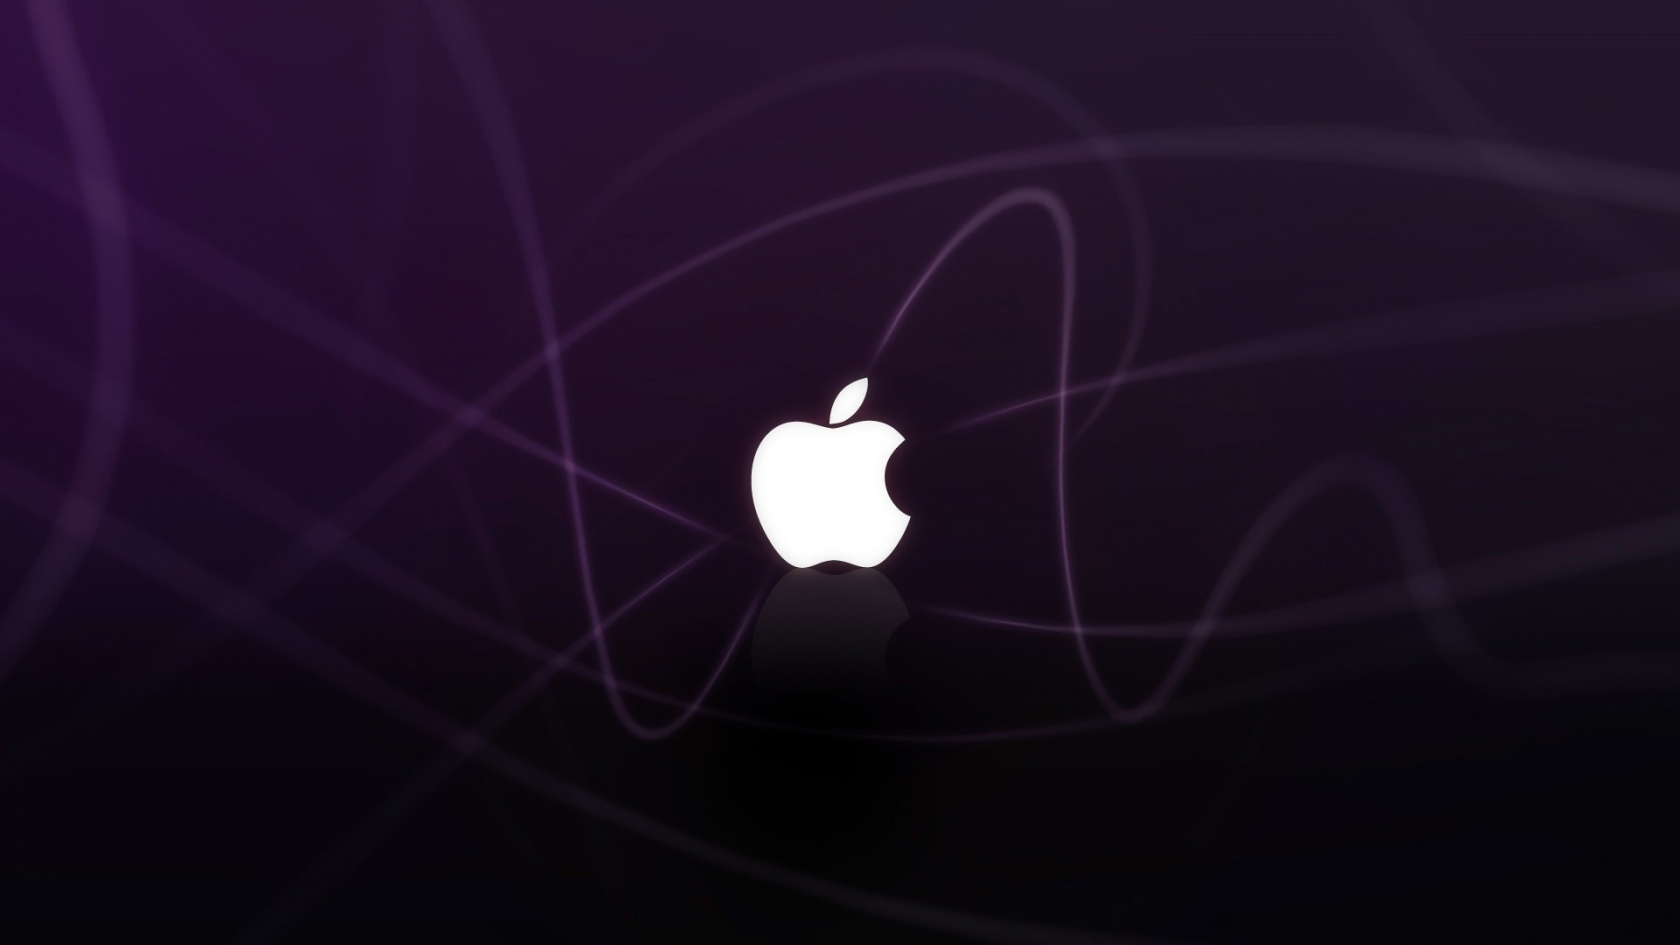 Purple Apple frequency for 1680 x 945 HDTV resolution